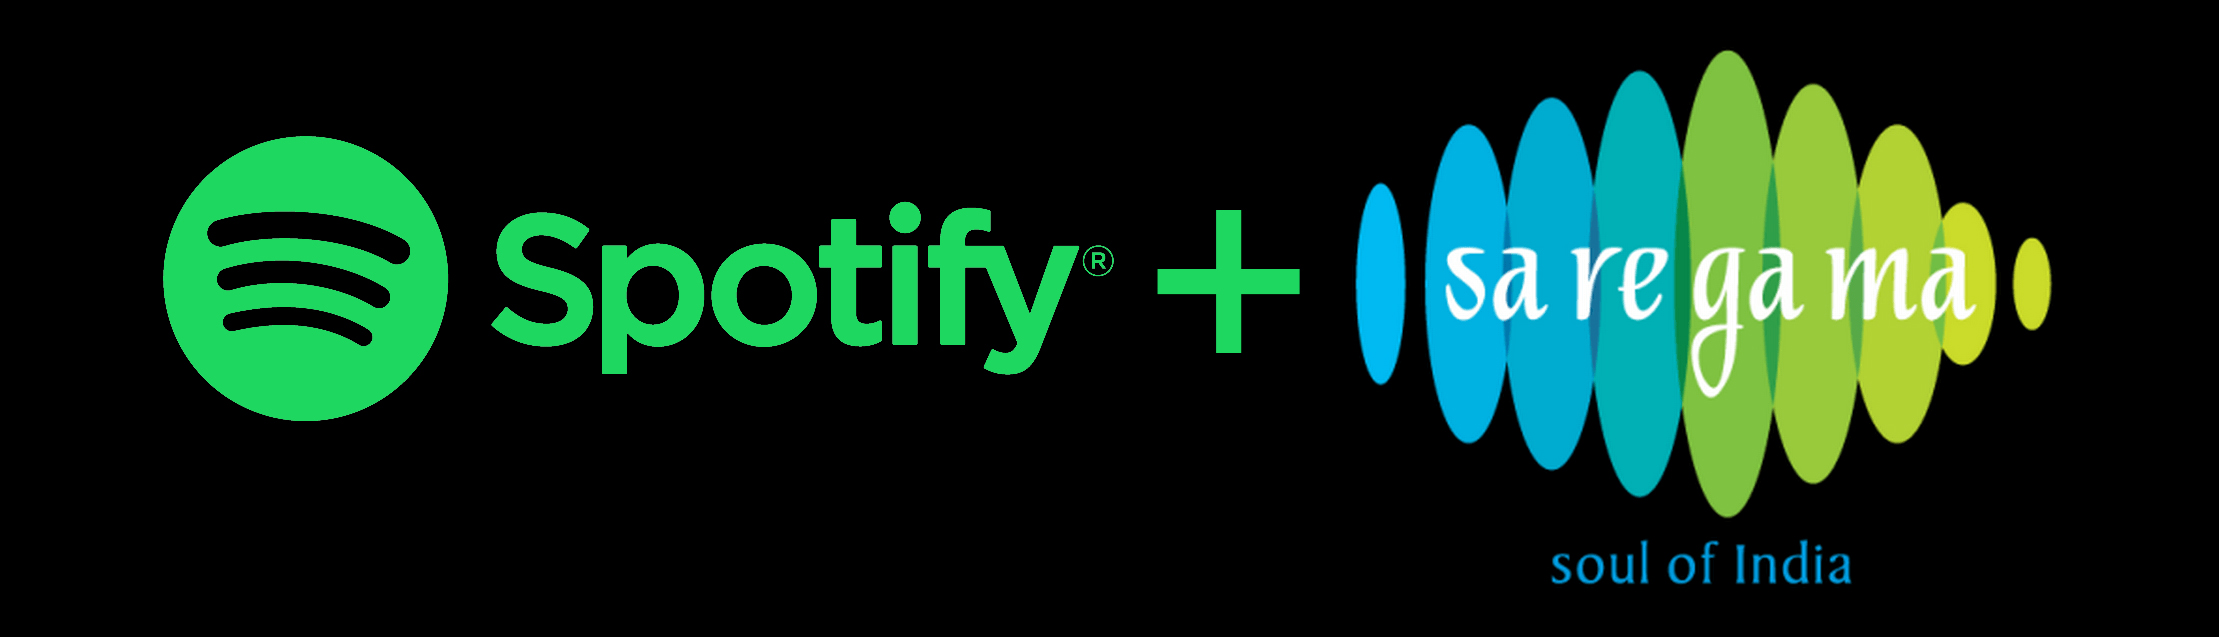 Spotify add over 100k tracks to Indian catalogue